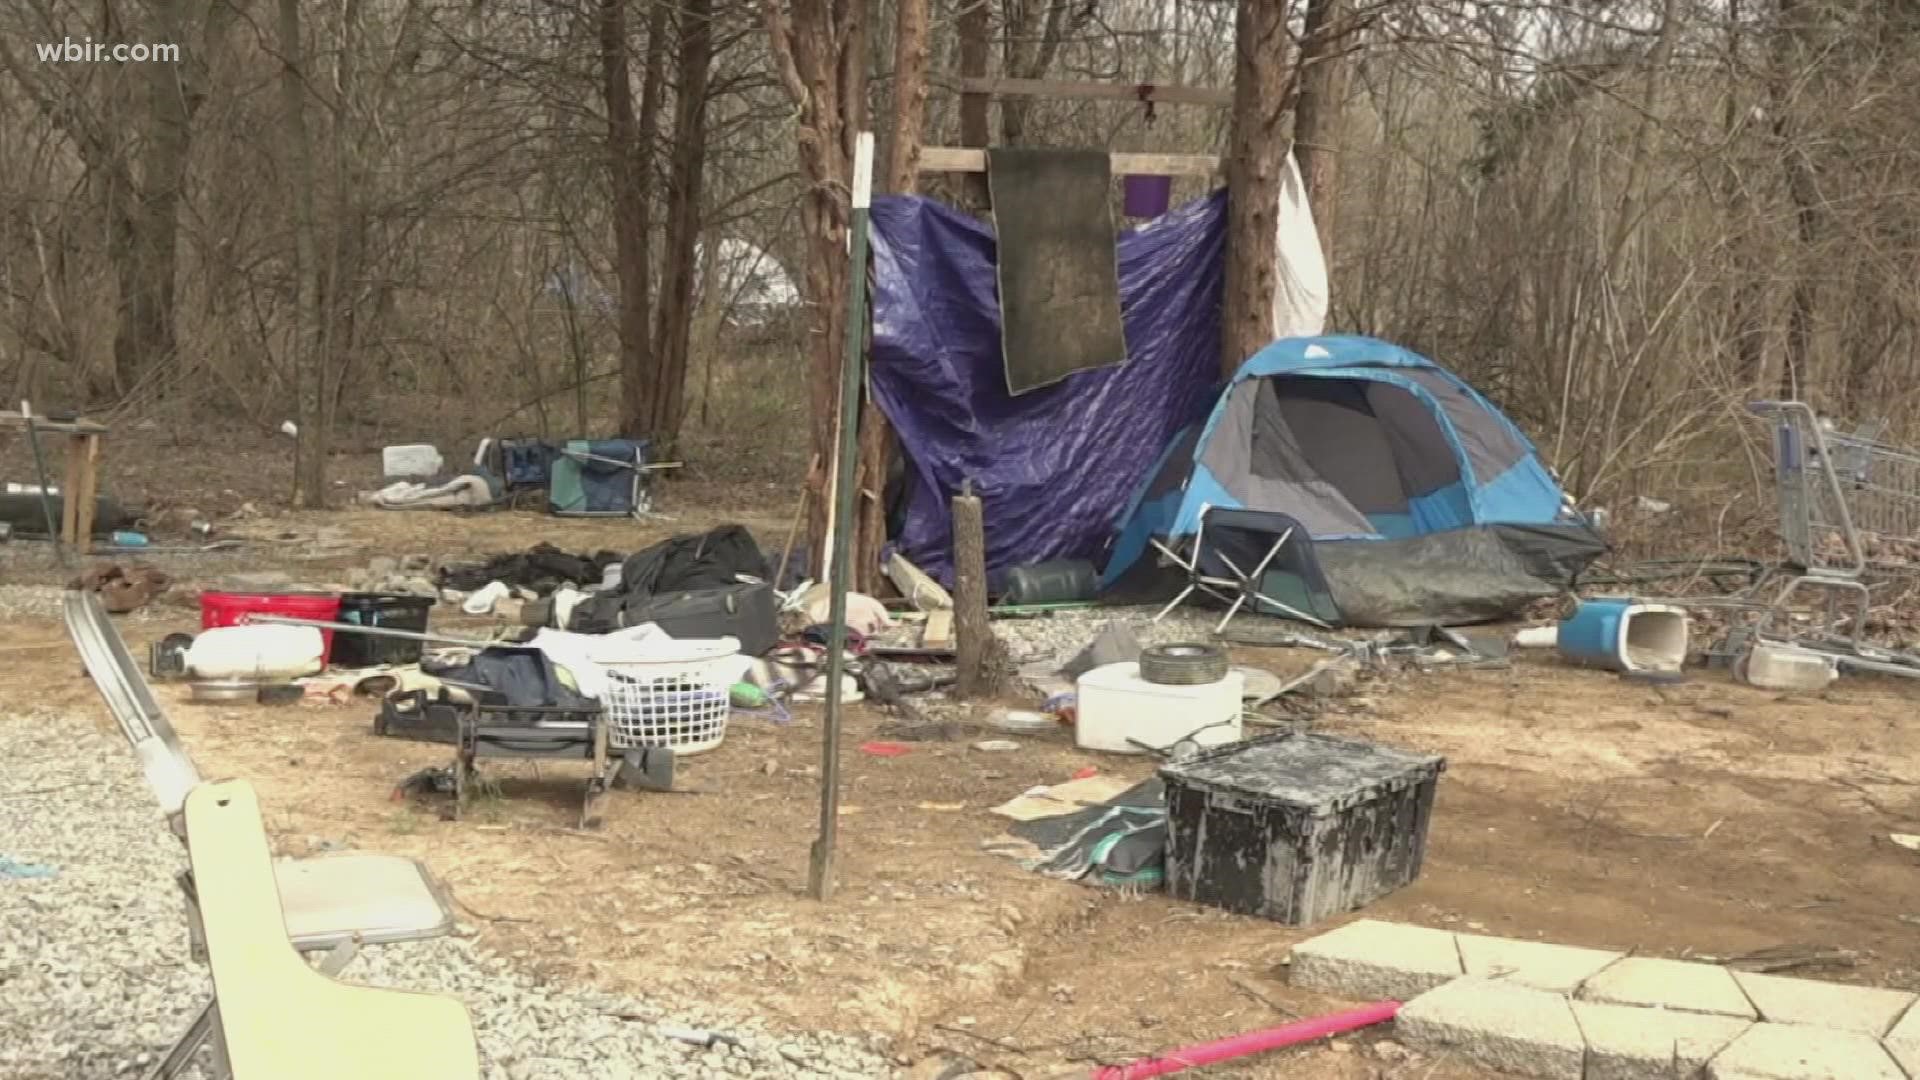 As more camps start to pop up in Knox County, officials say that homeless people are further away from resources that could help them.